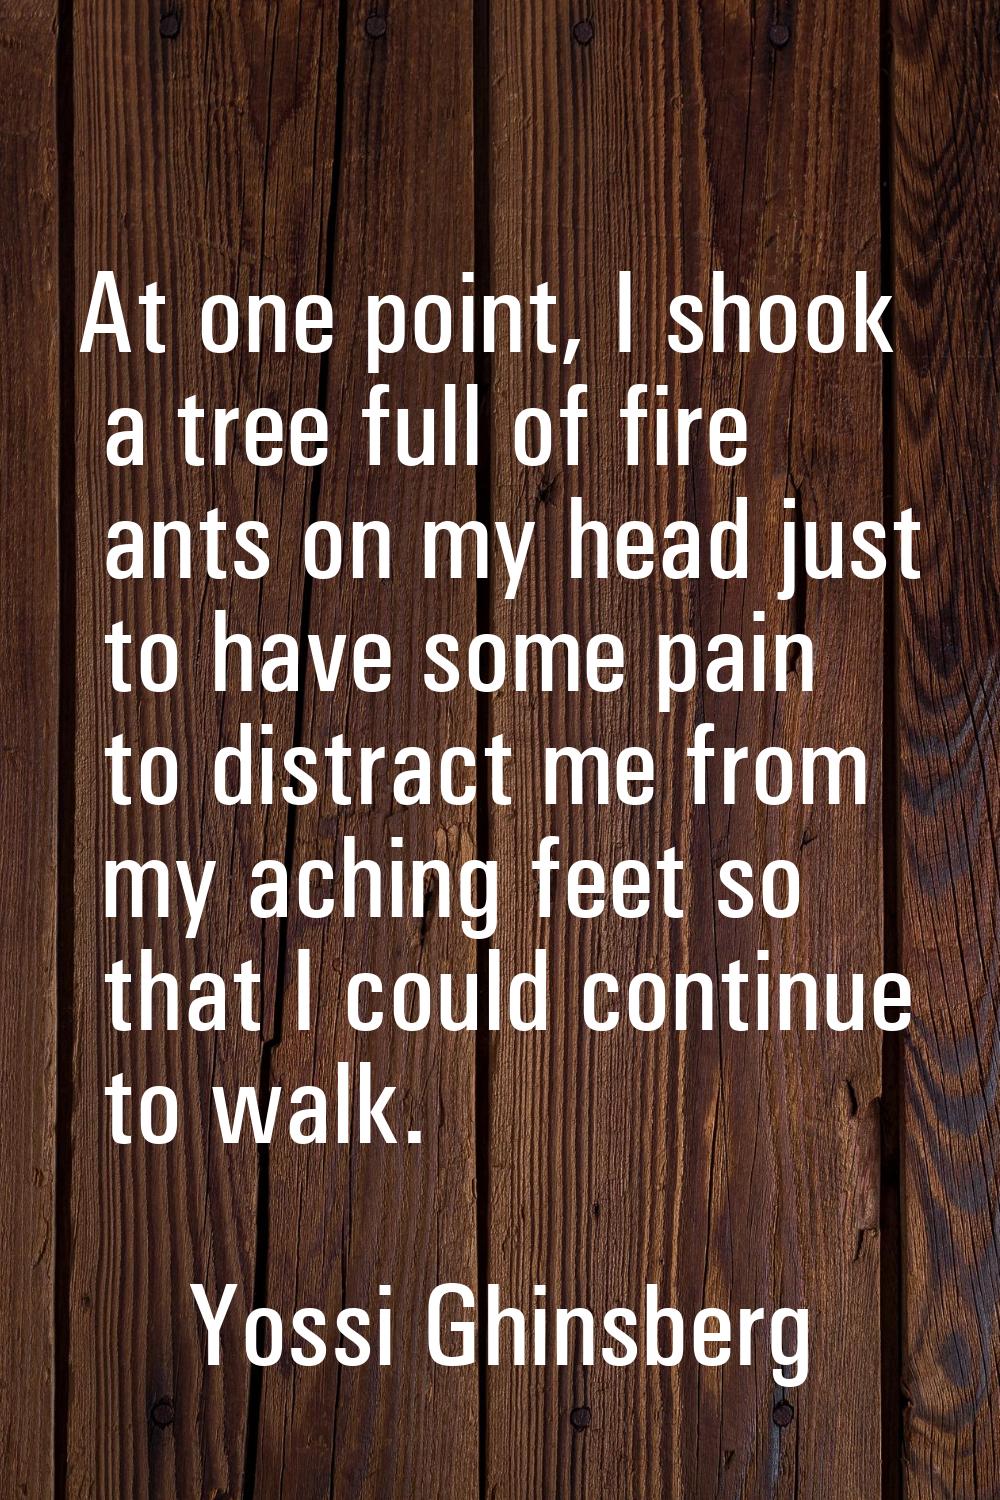 At one point, I shook a tree full of fire ants on my head just to have some pain to distract me fro